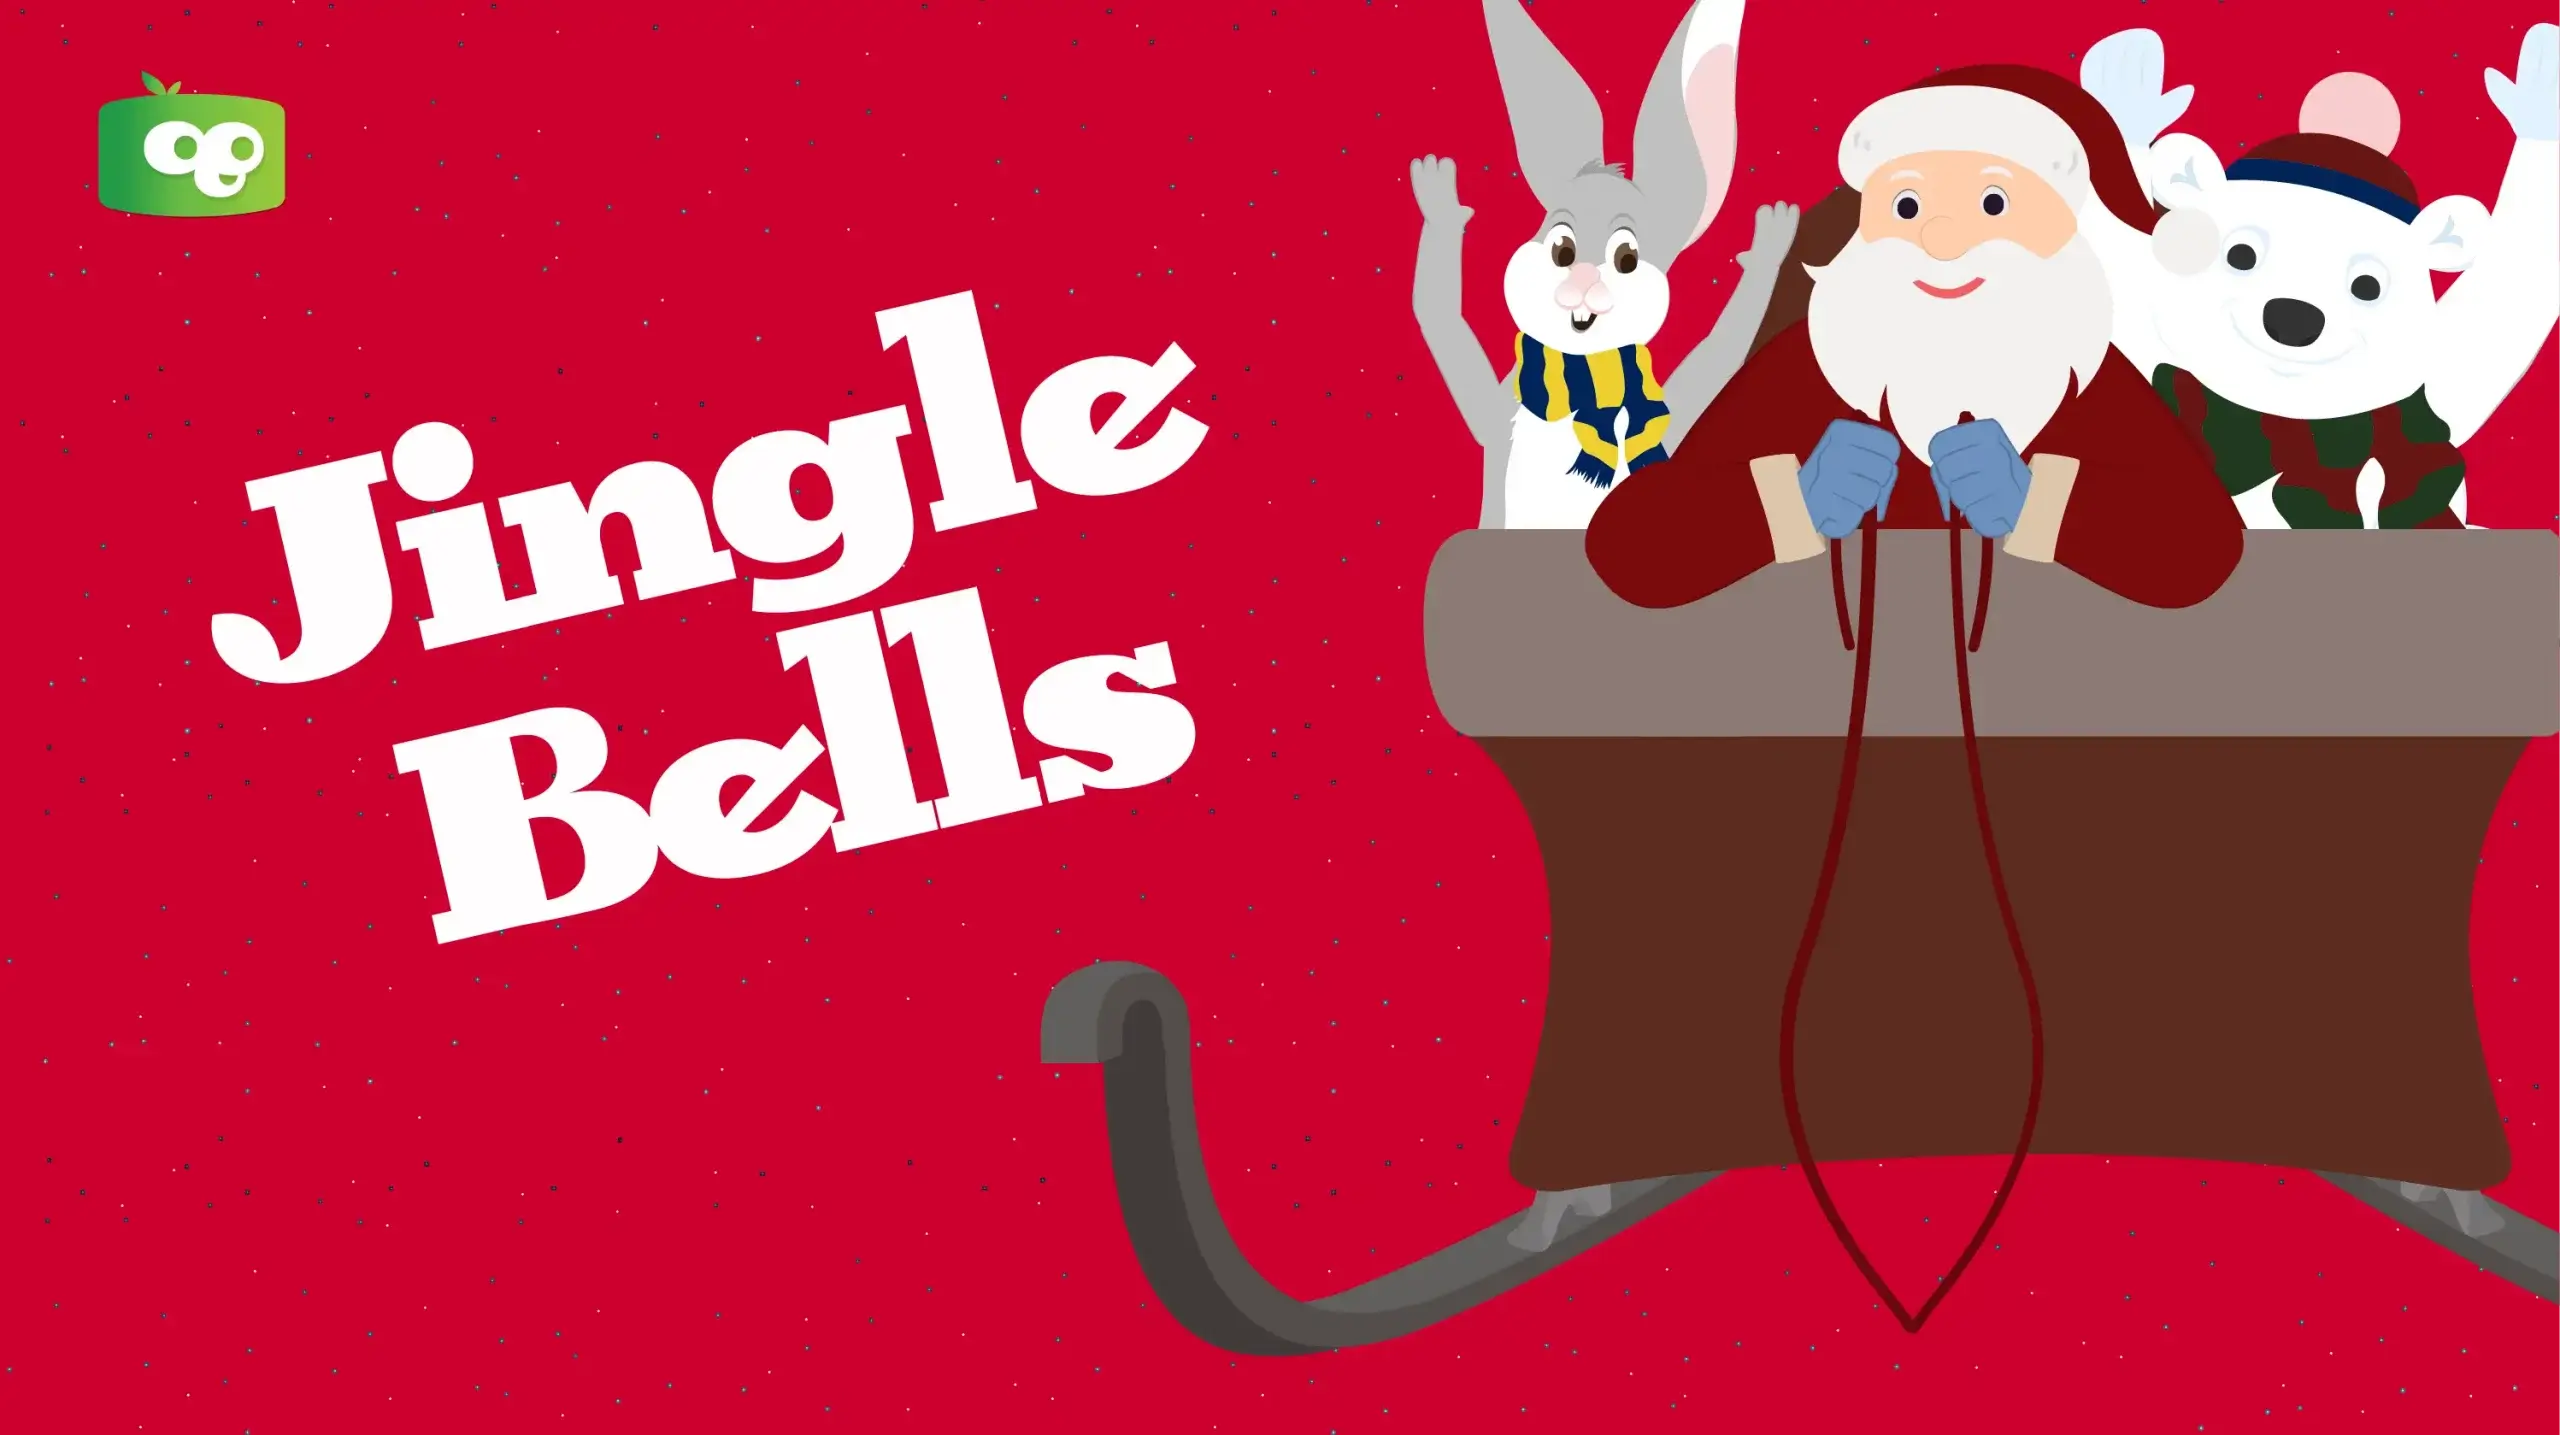 JINGLE BELLS CRAFTS - 4 Crafty Musical Activities by World Music With DARIA